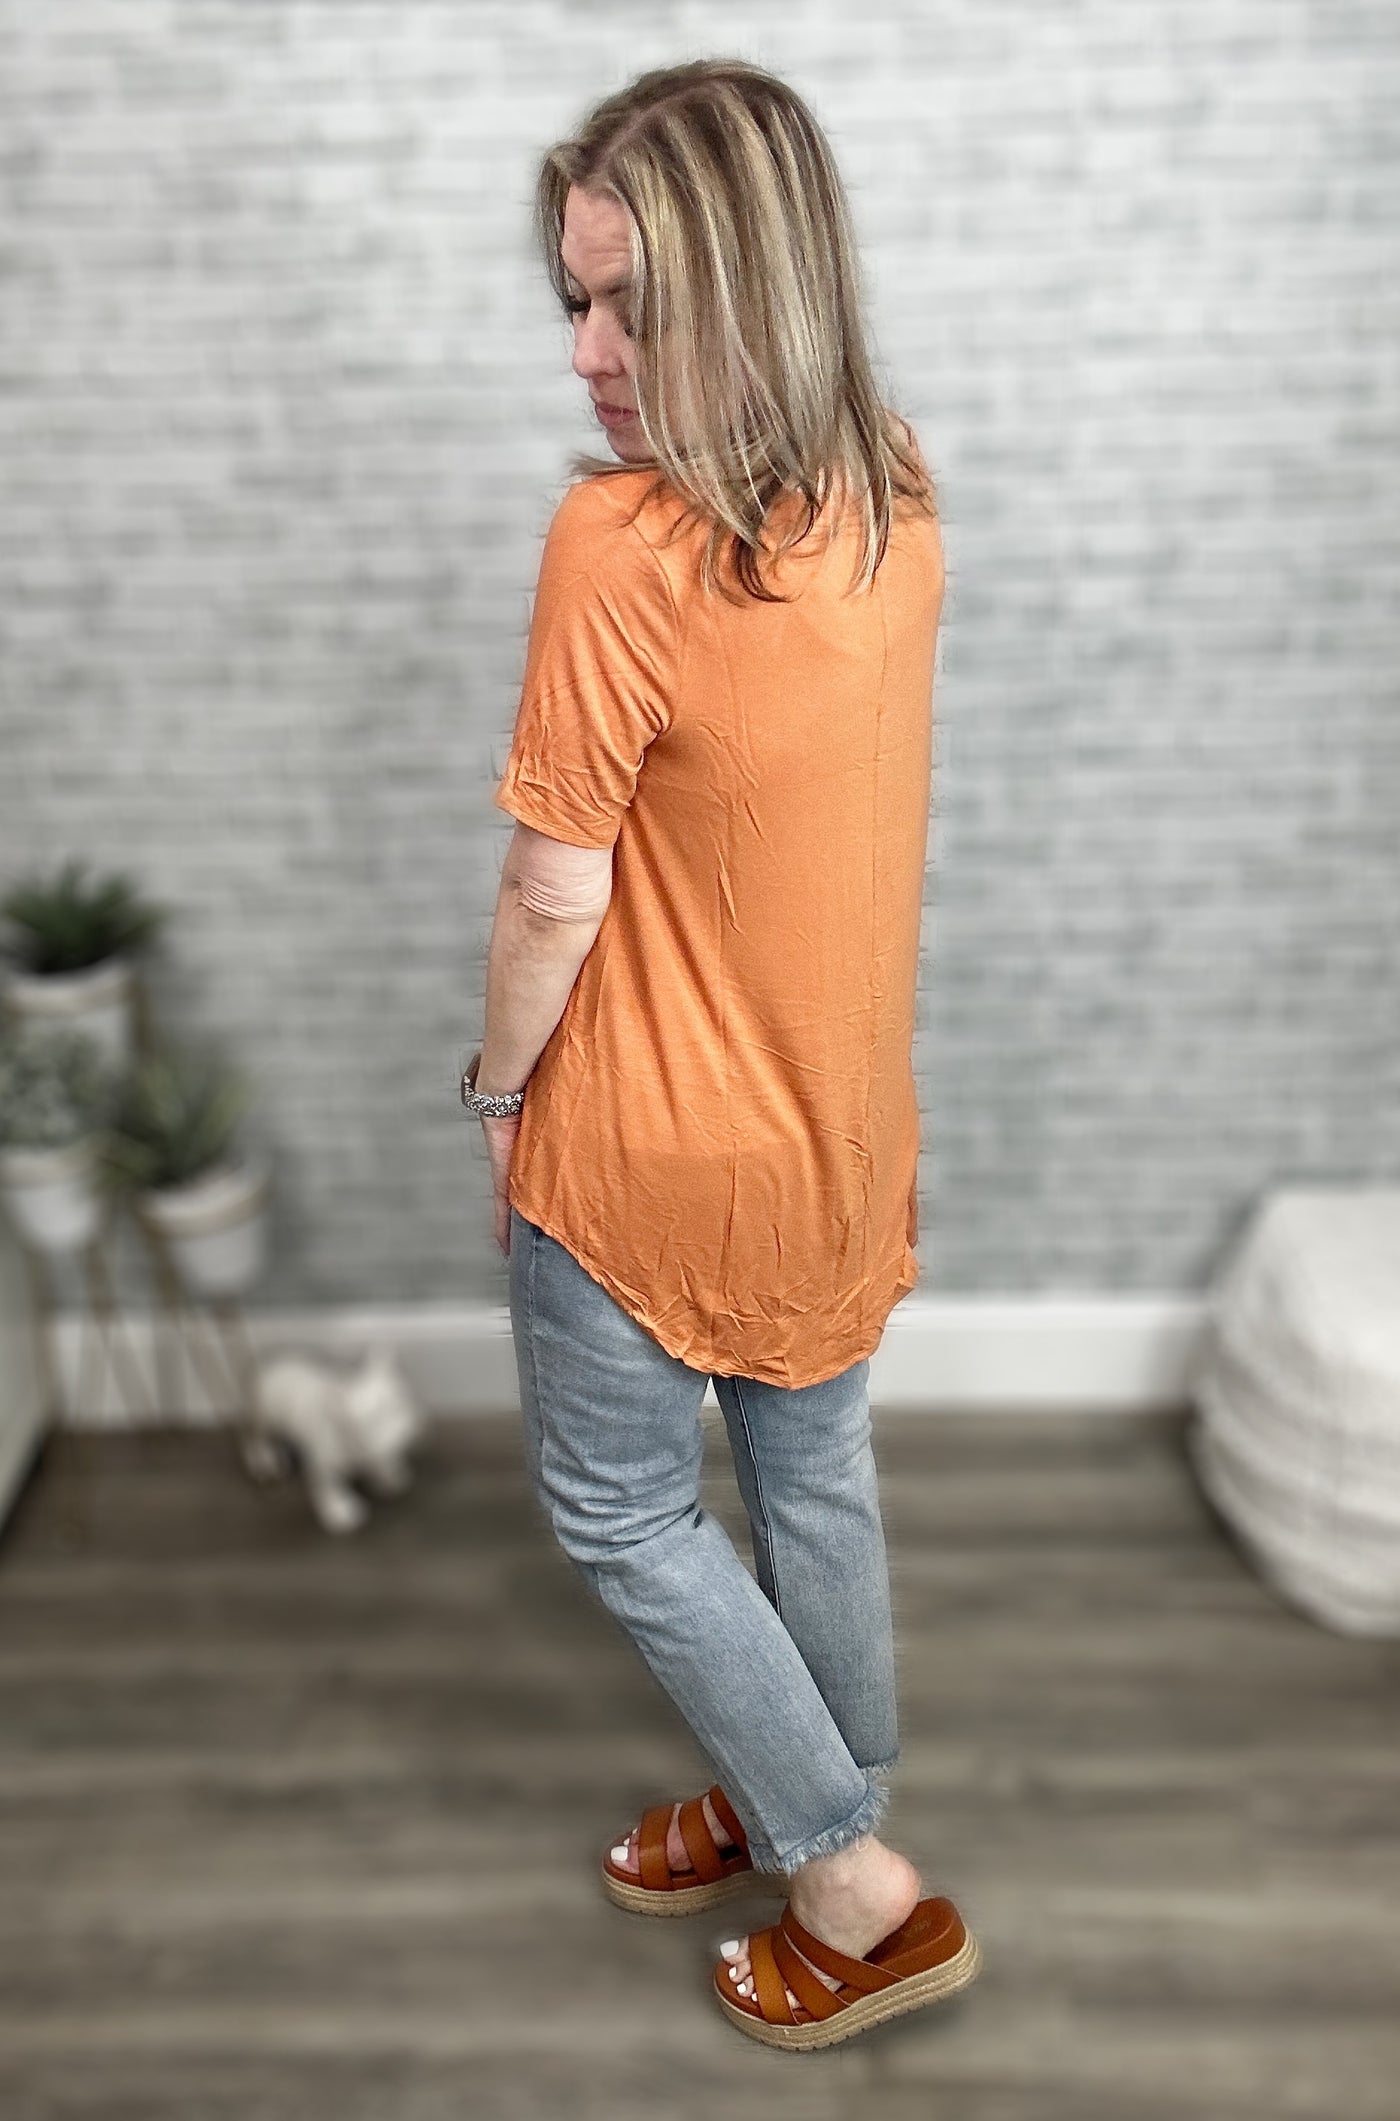 4 Colors - Luxe Rayon Short Sleeve V-Neck High Low Top